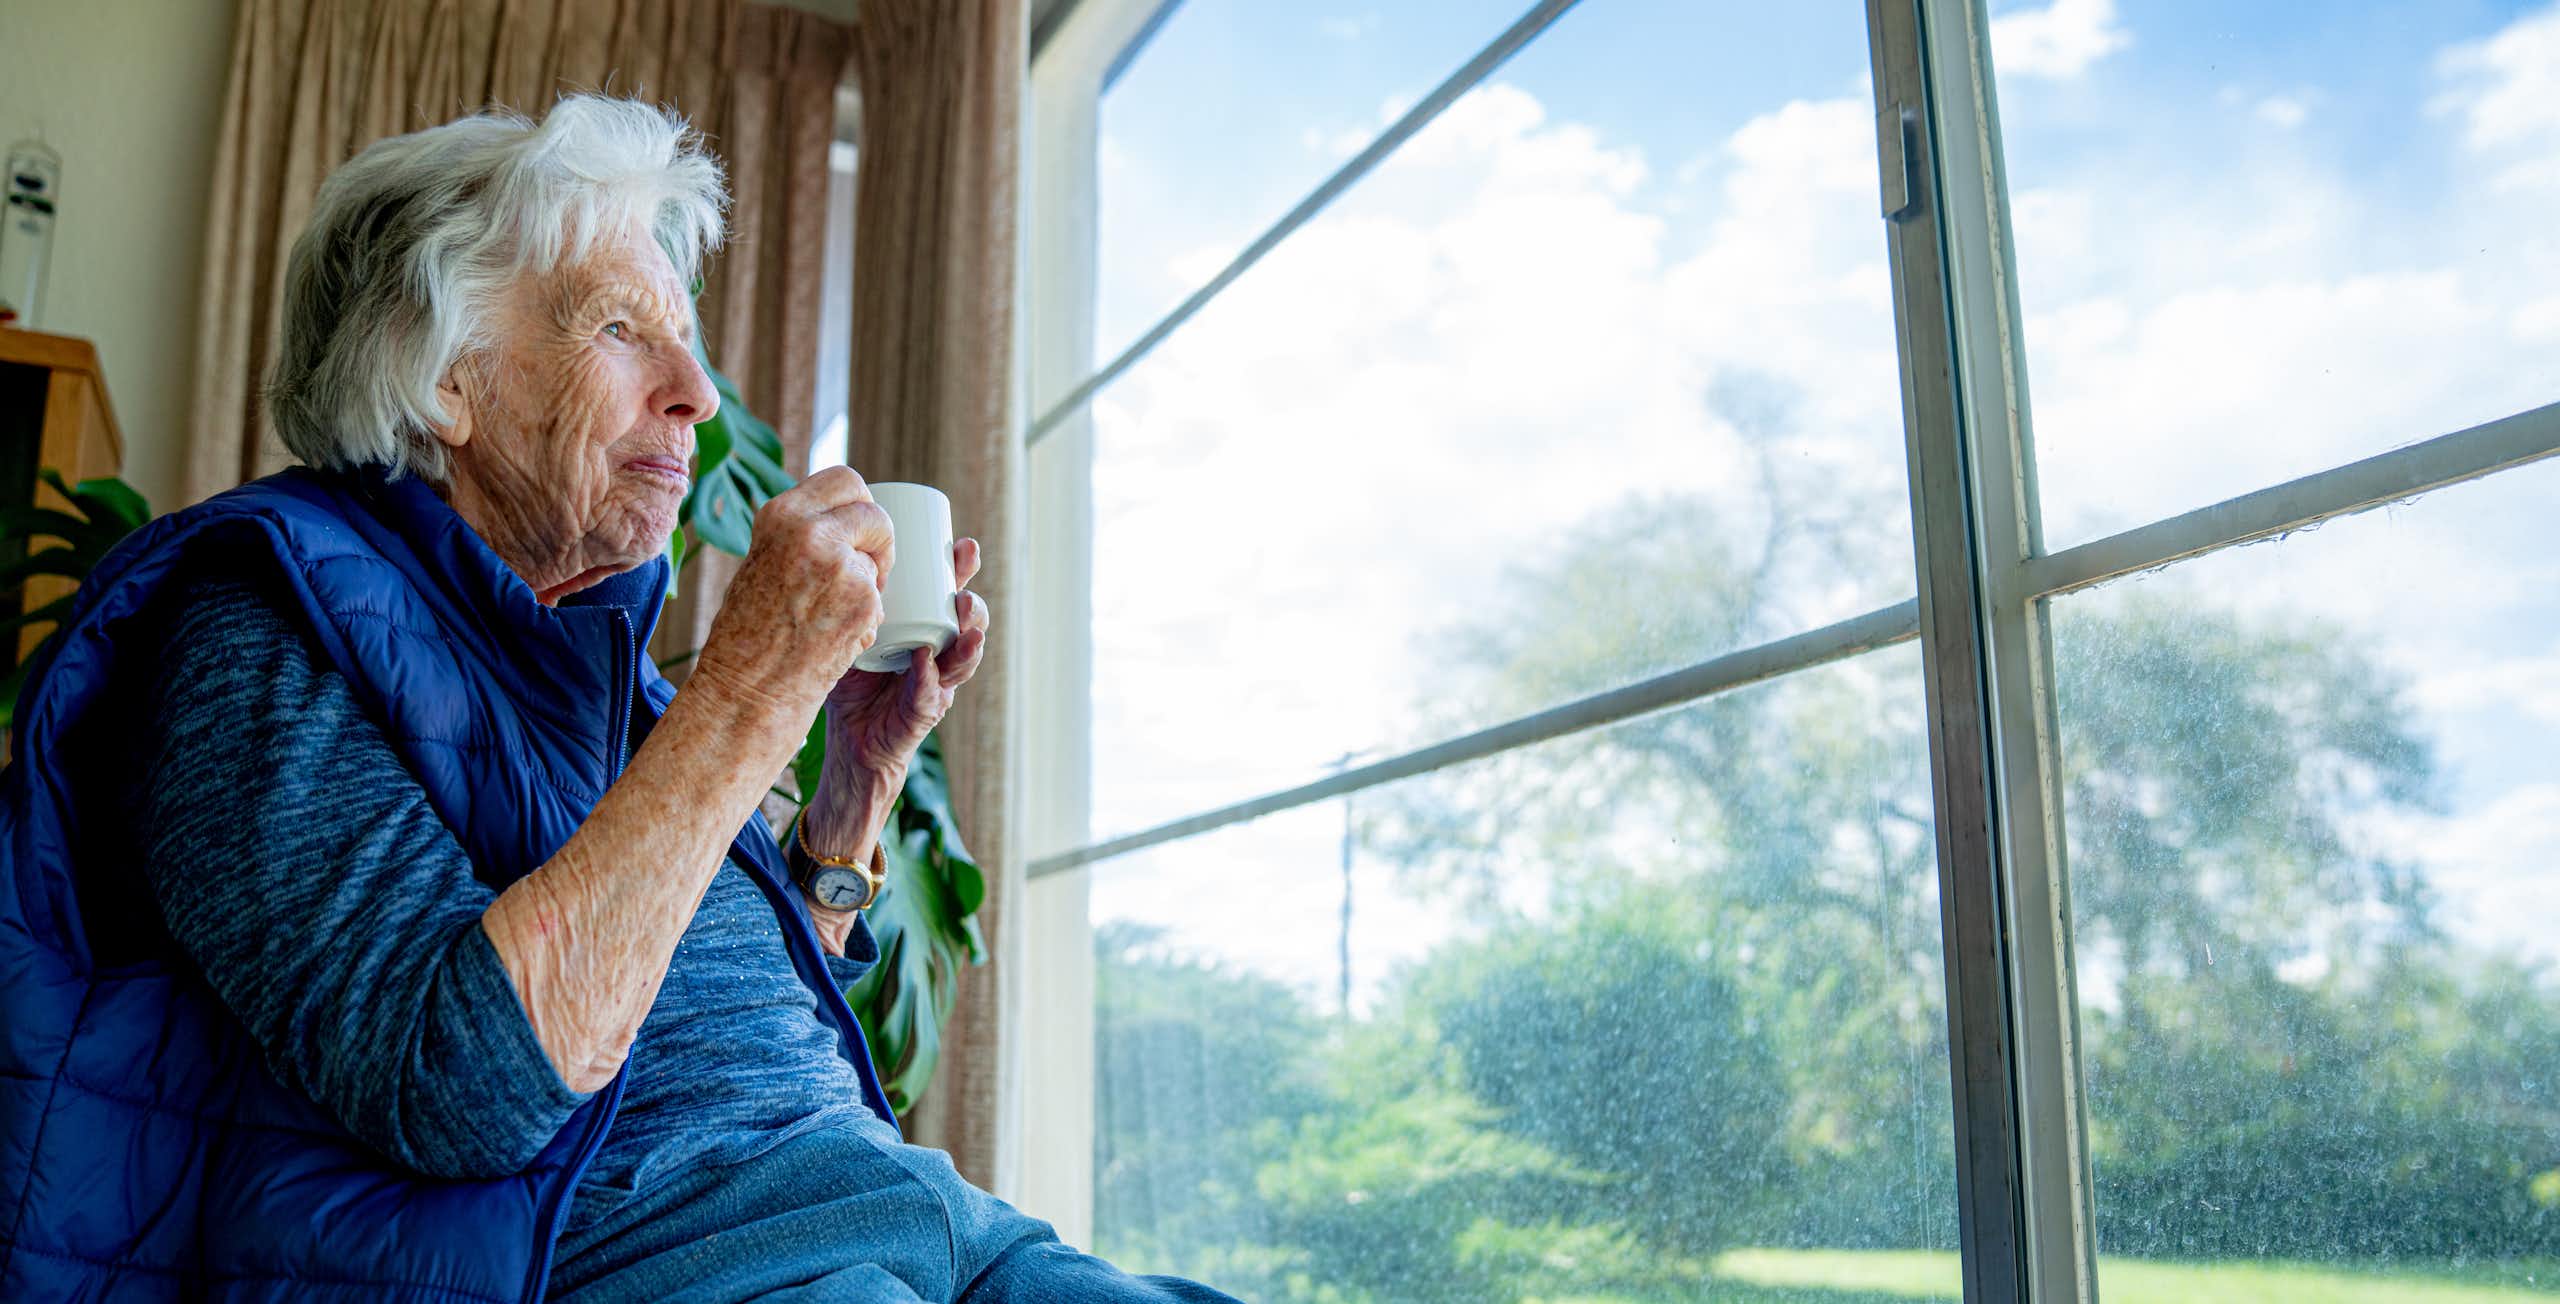 Cheerful older woman holds a mug while looking out the window, enjoying the view in the summertime.